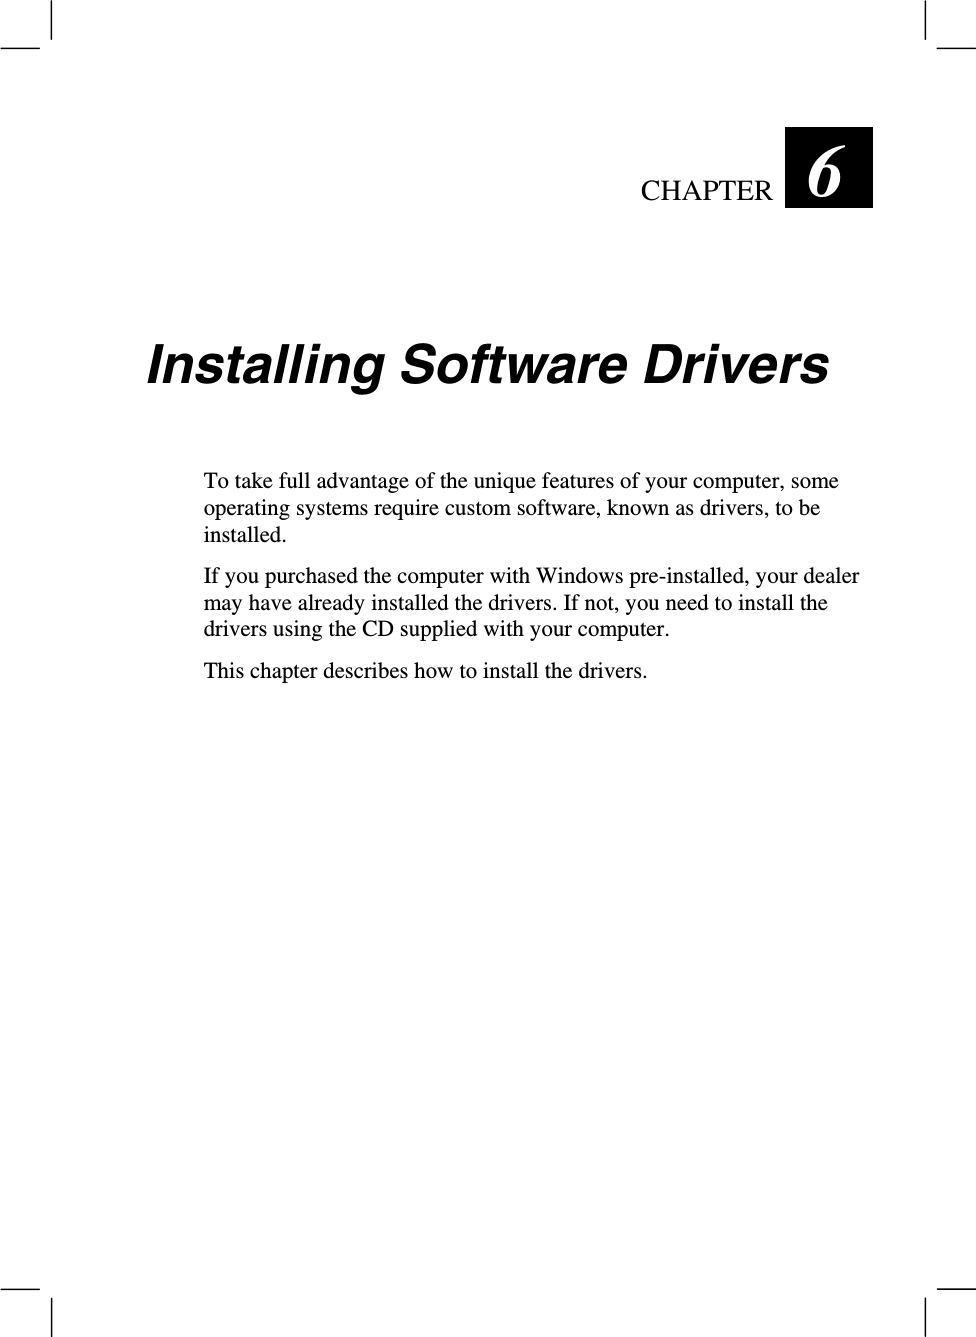 CHAPTER  6 Installing Software DriversTo take full advantage of the unique features of your computer, someoperating systems require custom software, known as drivers, to beinstalled.If you purchased the computer with Windows pre-installed, your dealermay have already installed the drivers. If not, you need to install thedrivers using the CD supplied with your computer.This chapter describes how to install the drivers.